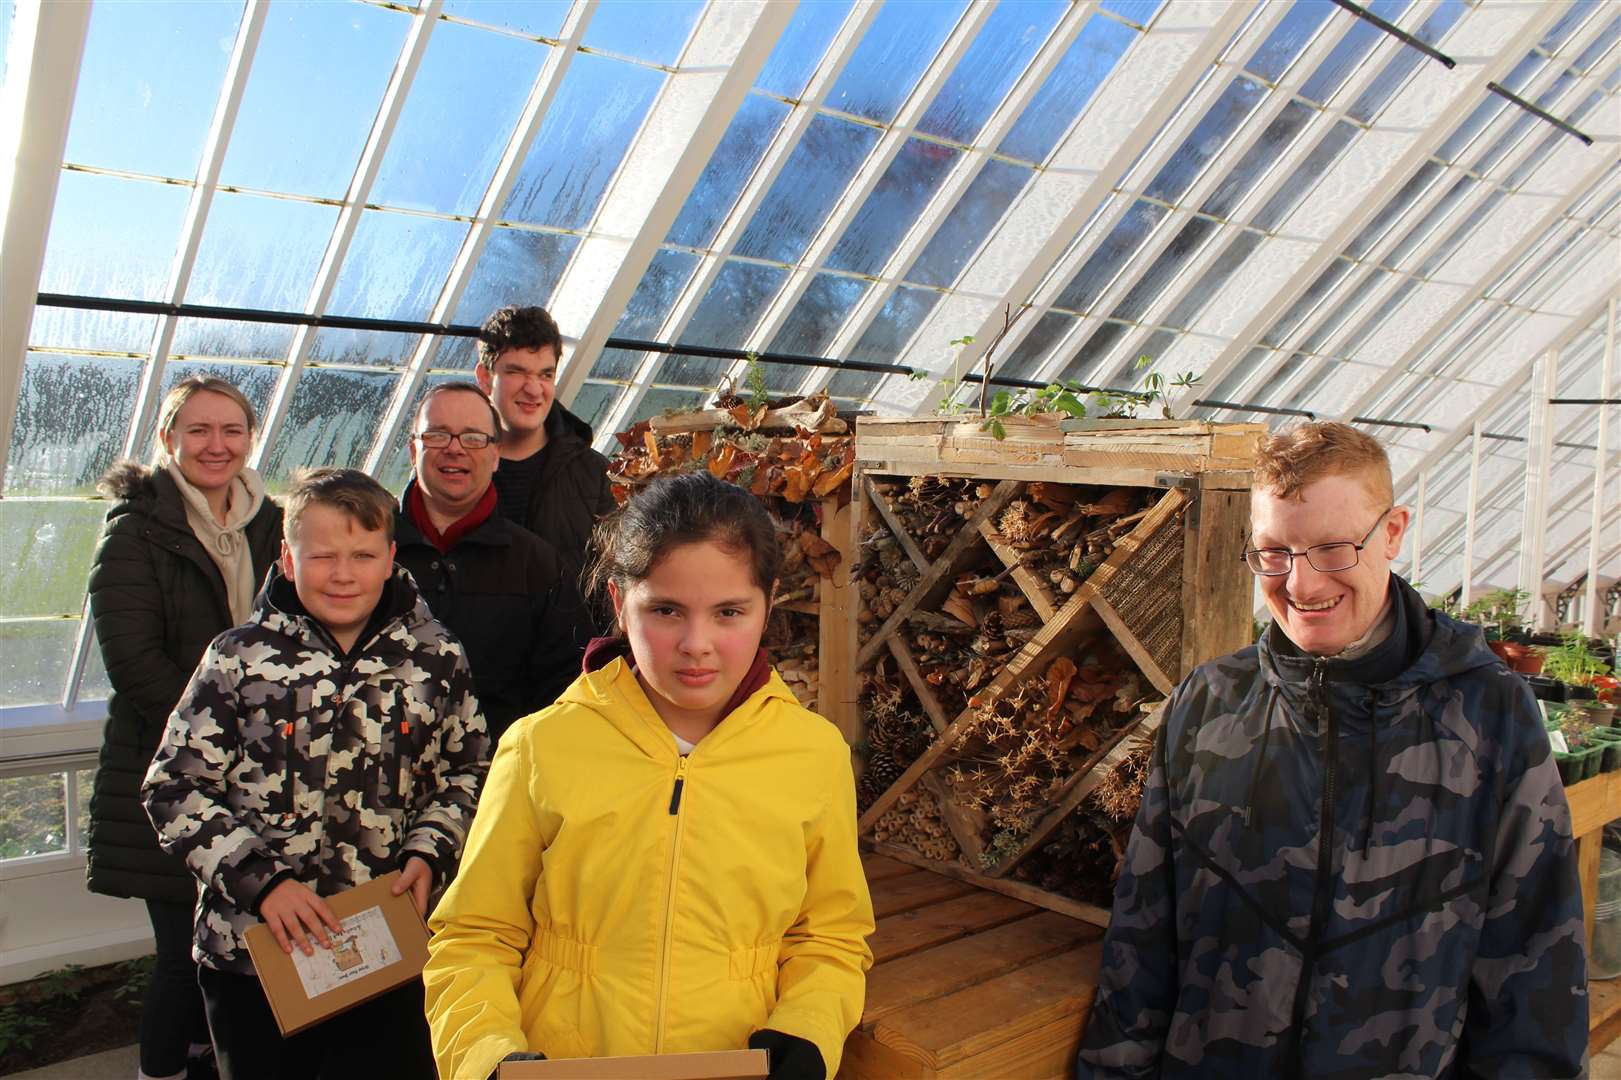 The bug hotels project involved pupils from Banff Primary School, woodworkers from Banff Day Opportunities and volunteers at The Vinery.